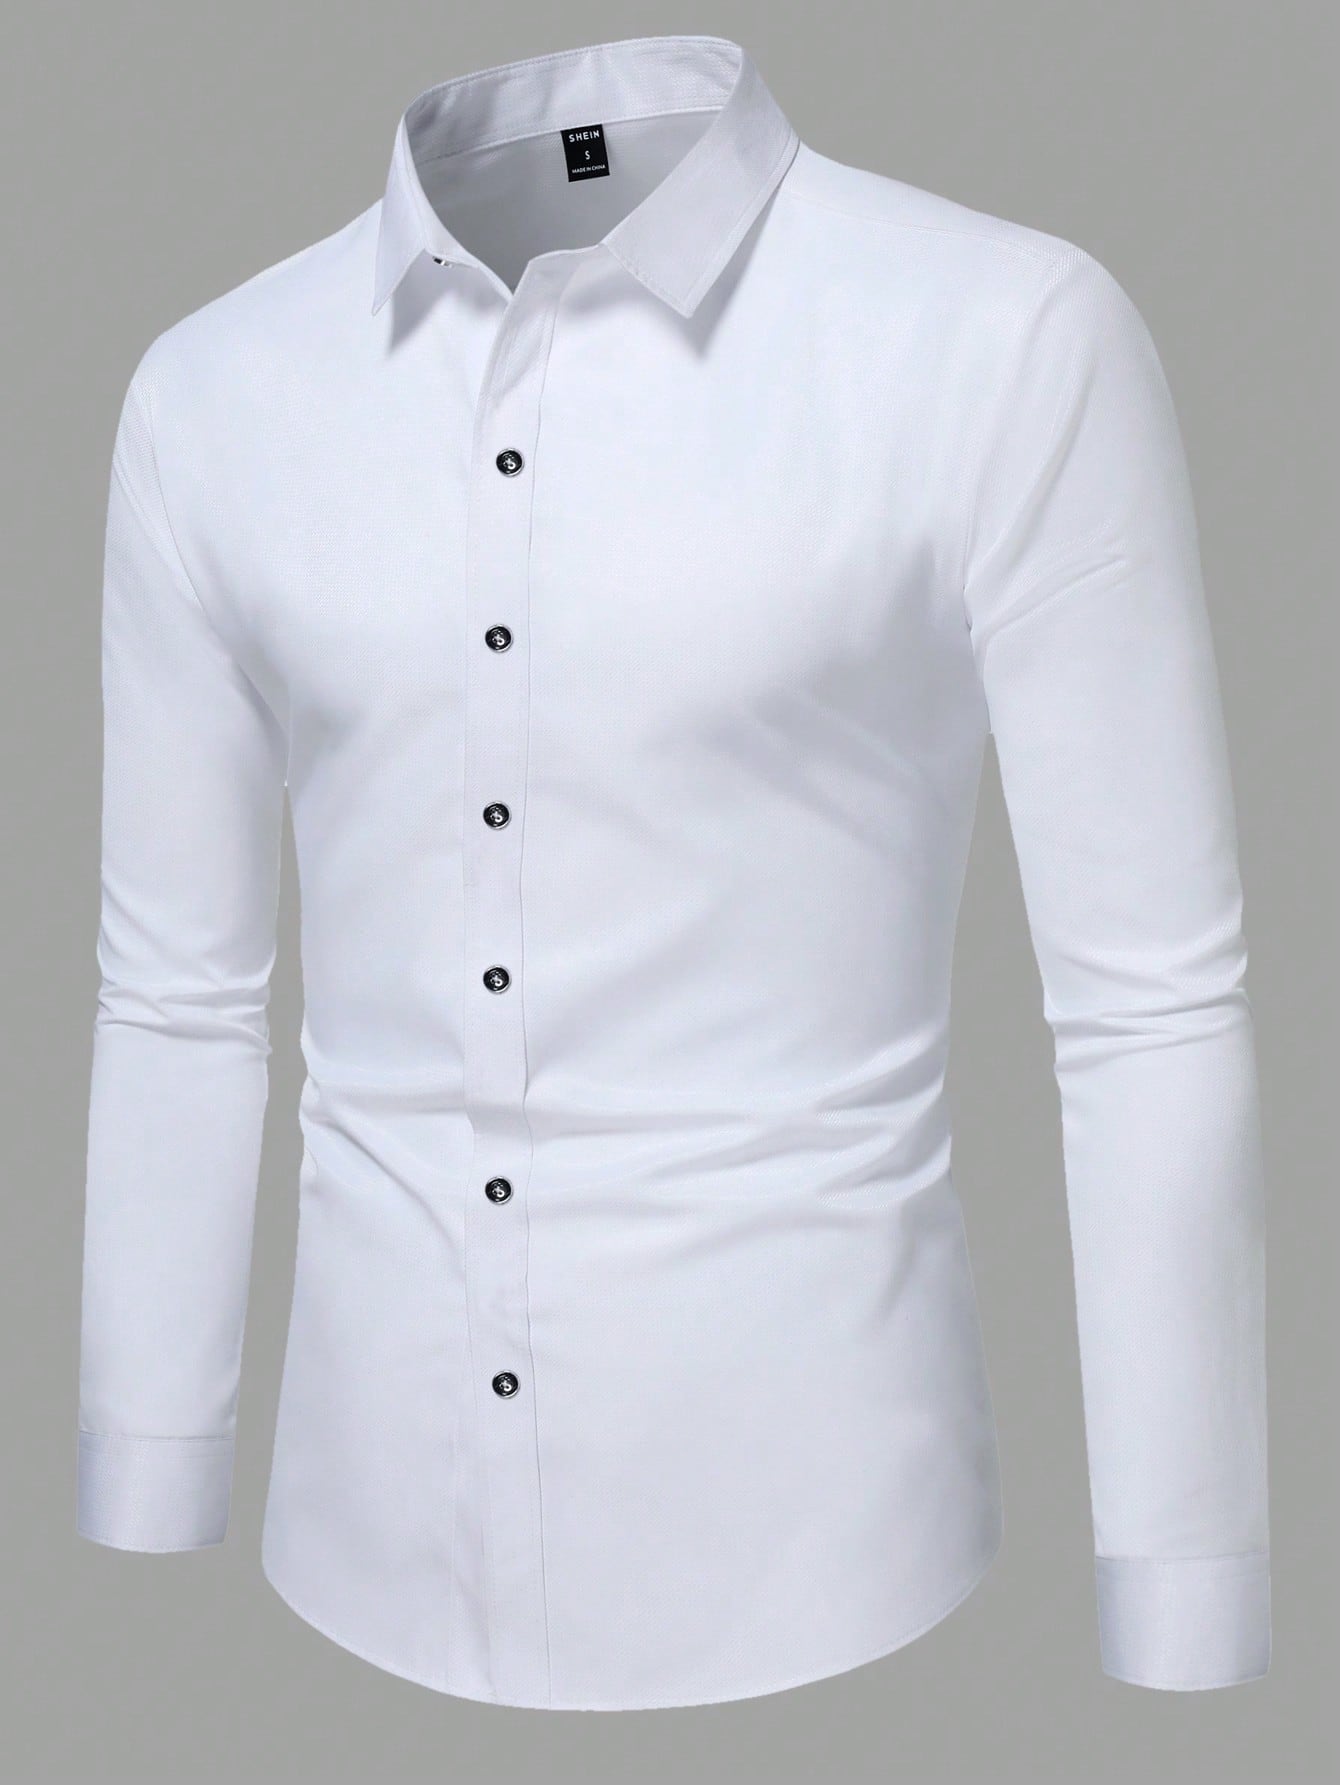 Manfinity Mode Men Patched Pocket Button Up Shirt